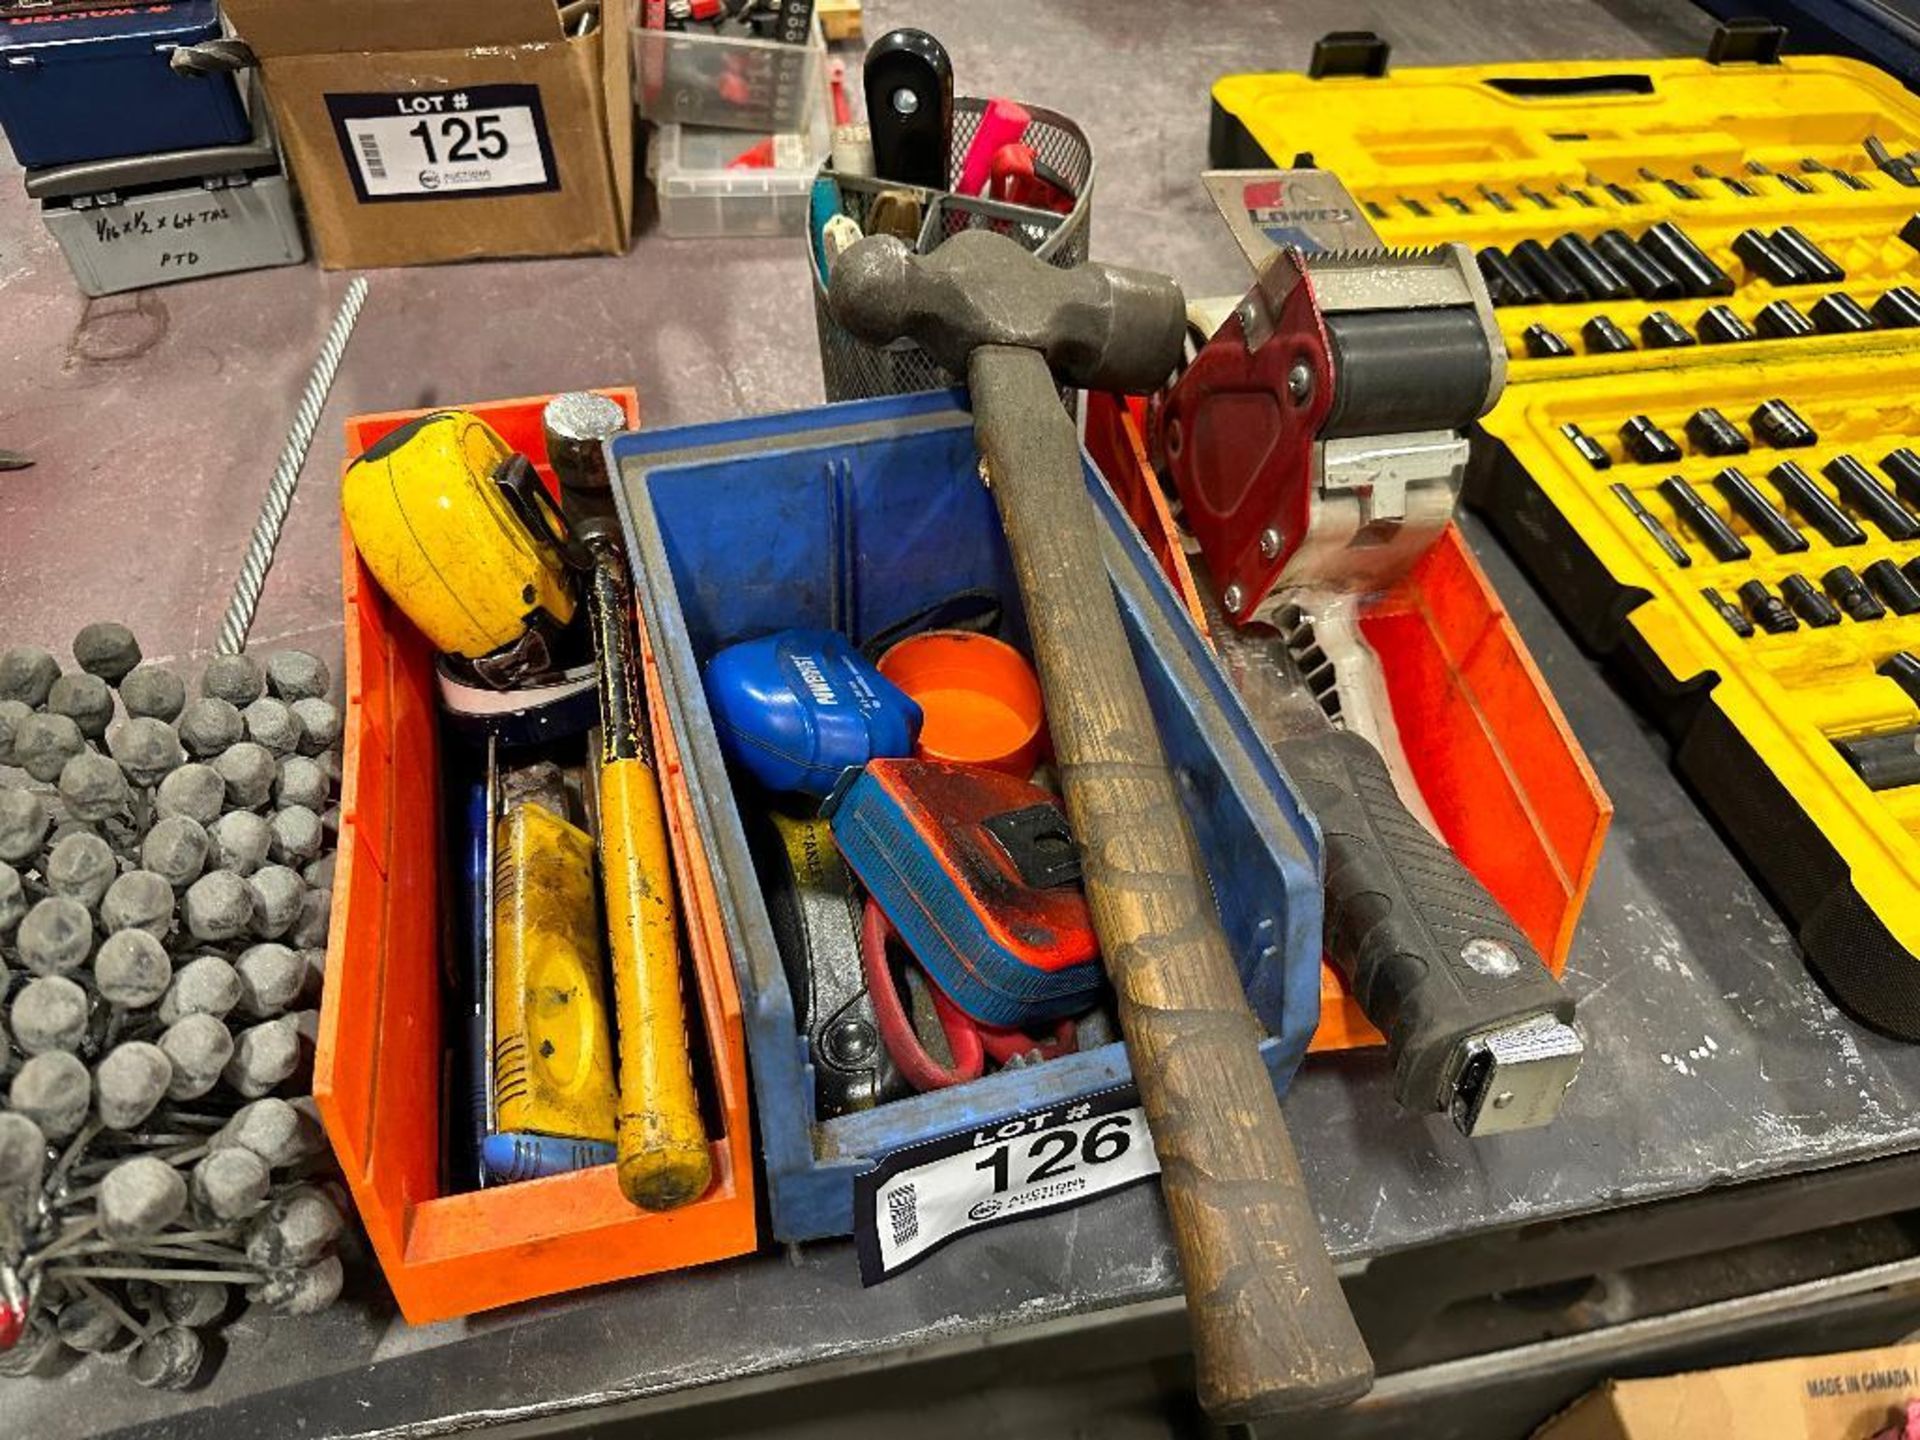 Lot of Asst Tool Including Tape Gun, Hammers, Tape Measures, etc. - Image 11 of 12